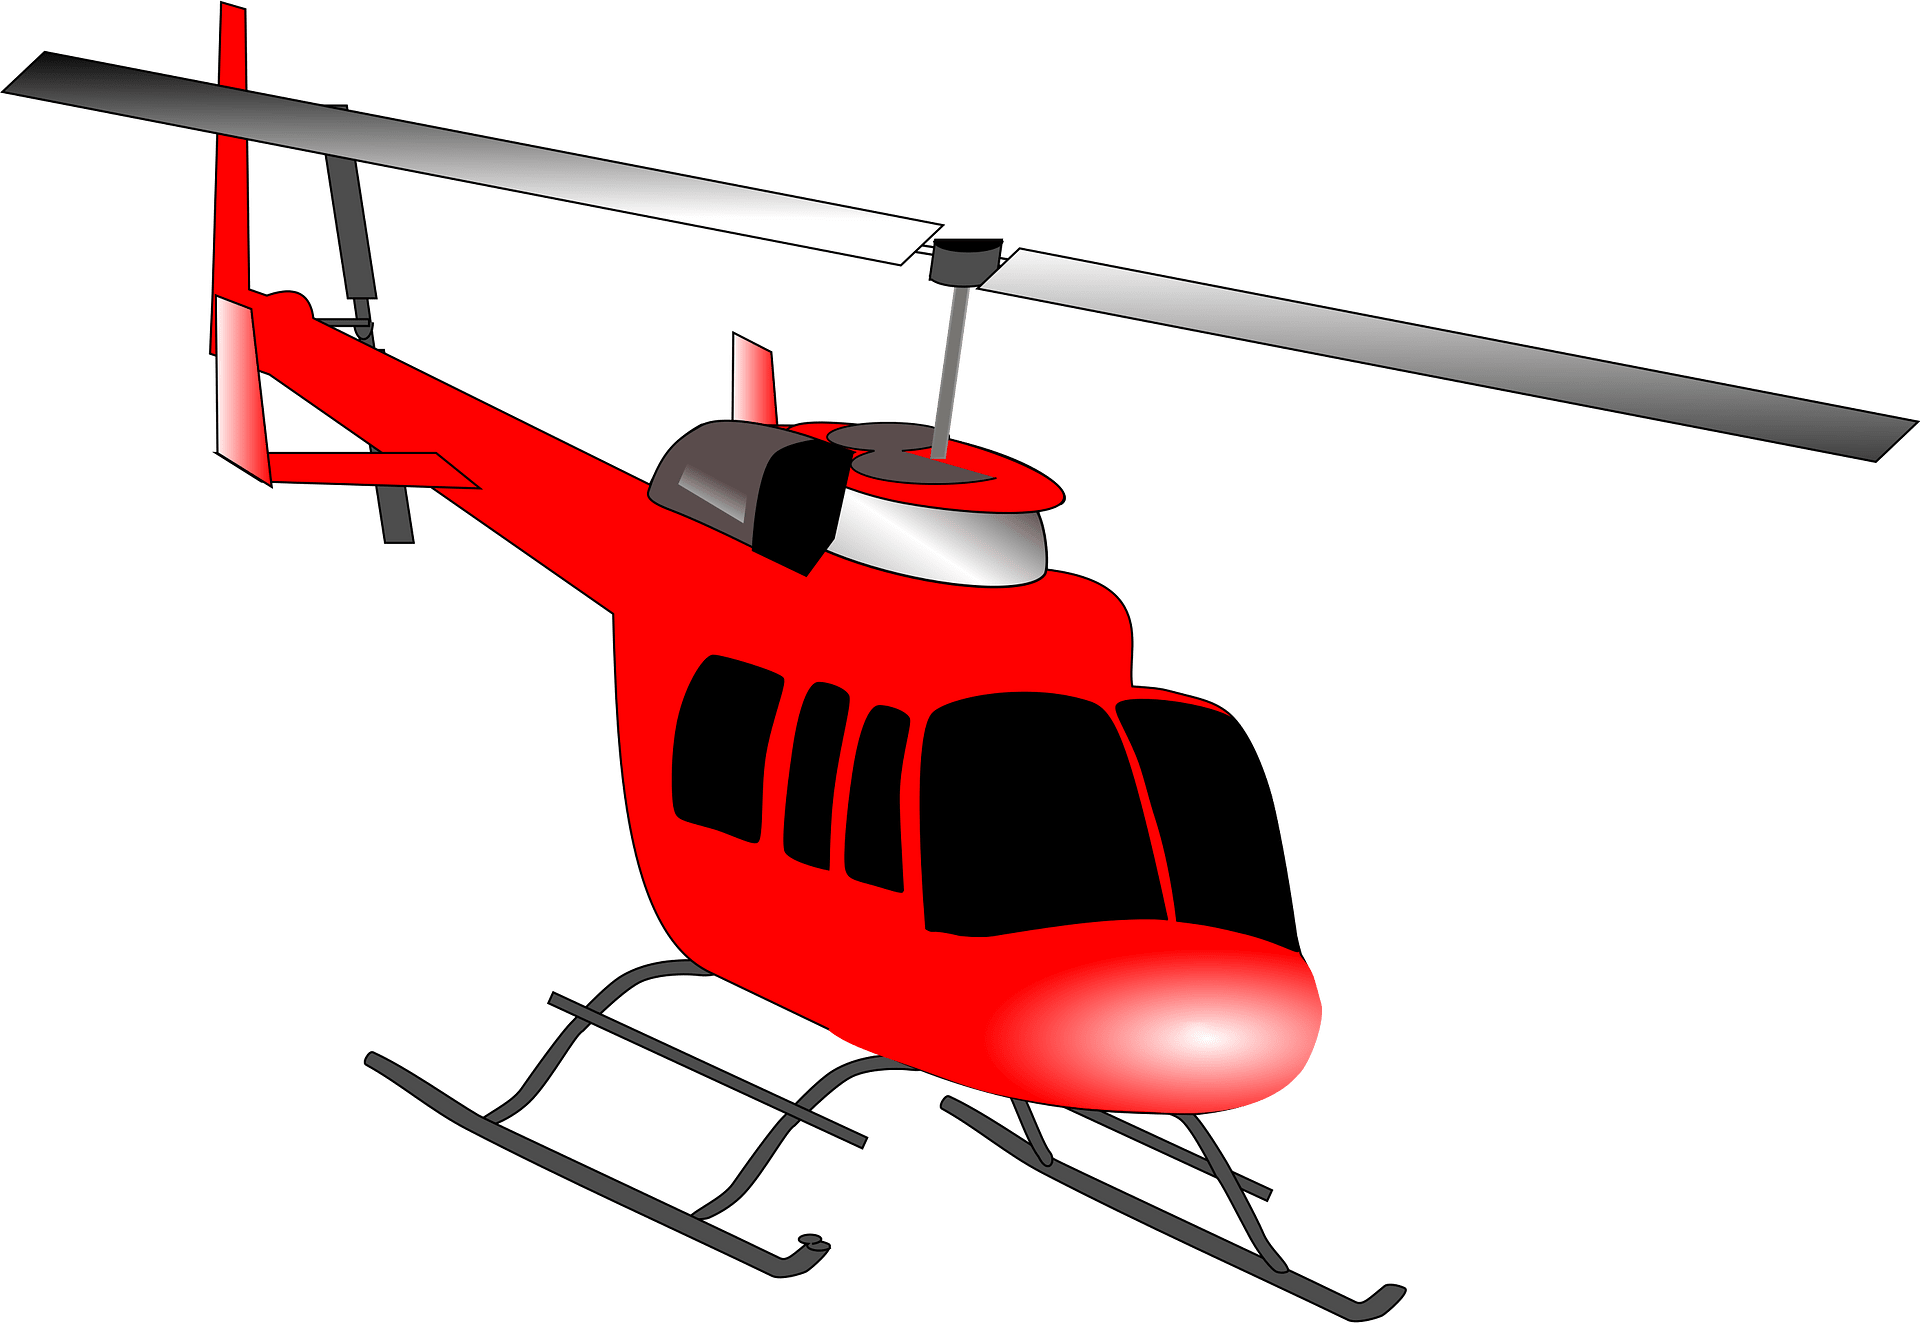 Cartoon helicopter pilot clipart. Free download transparent .PNG